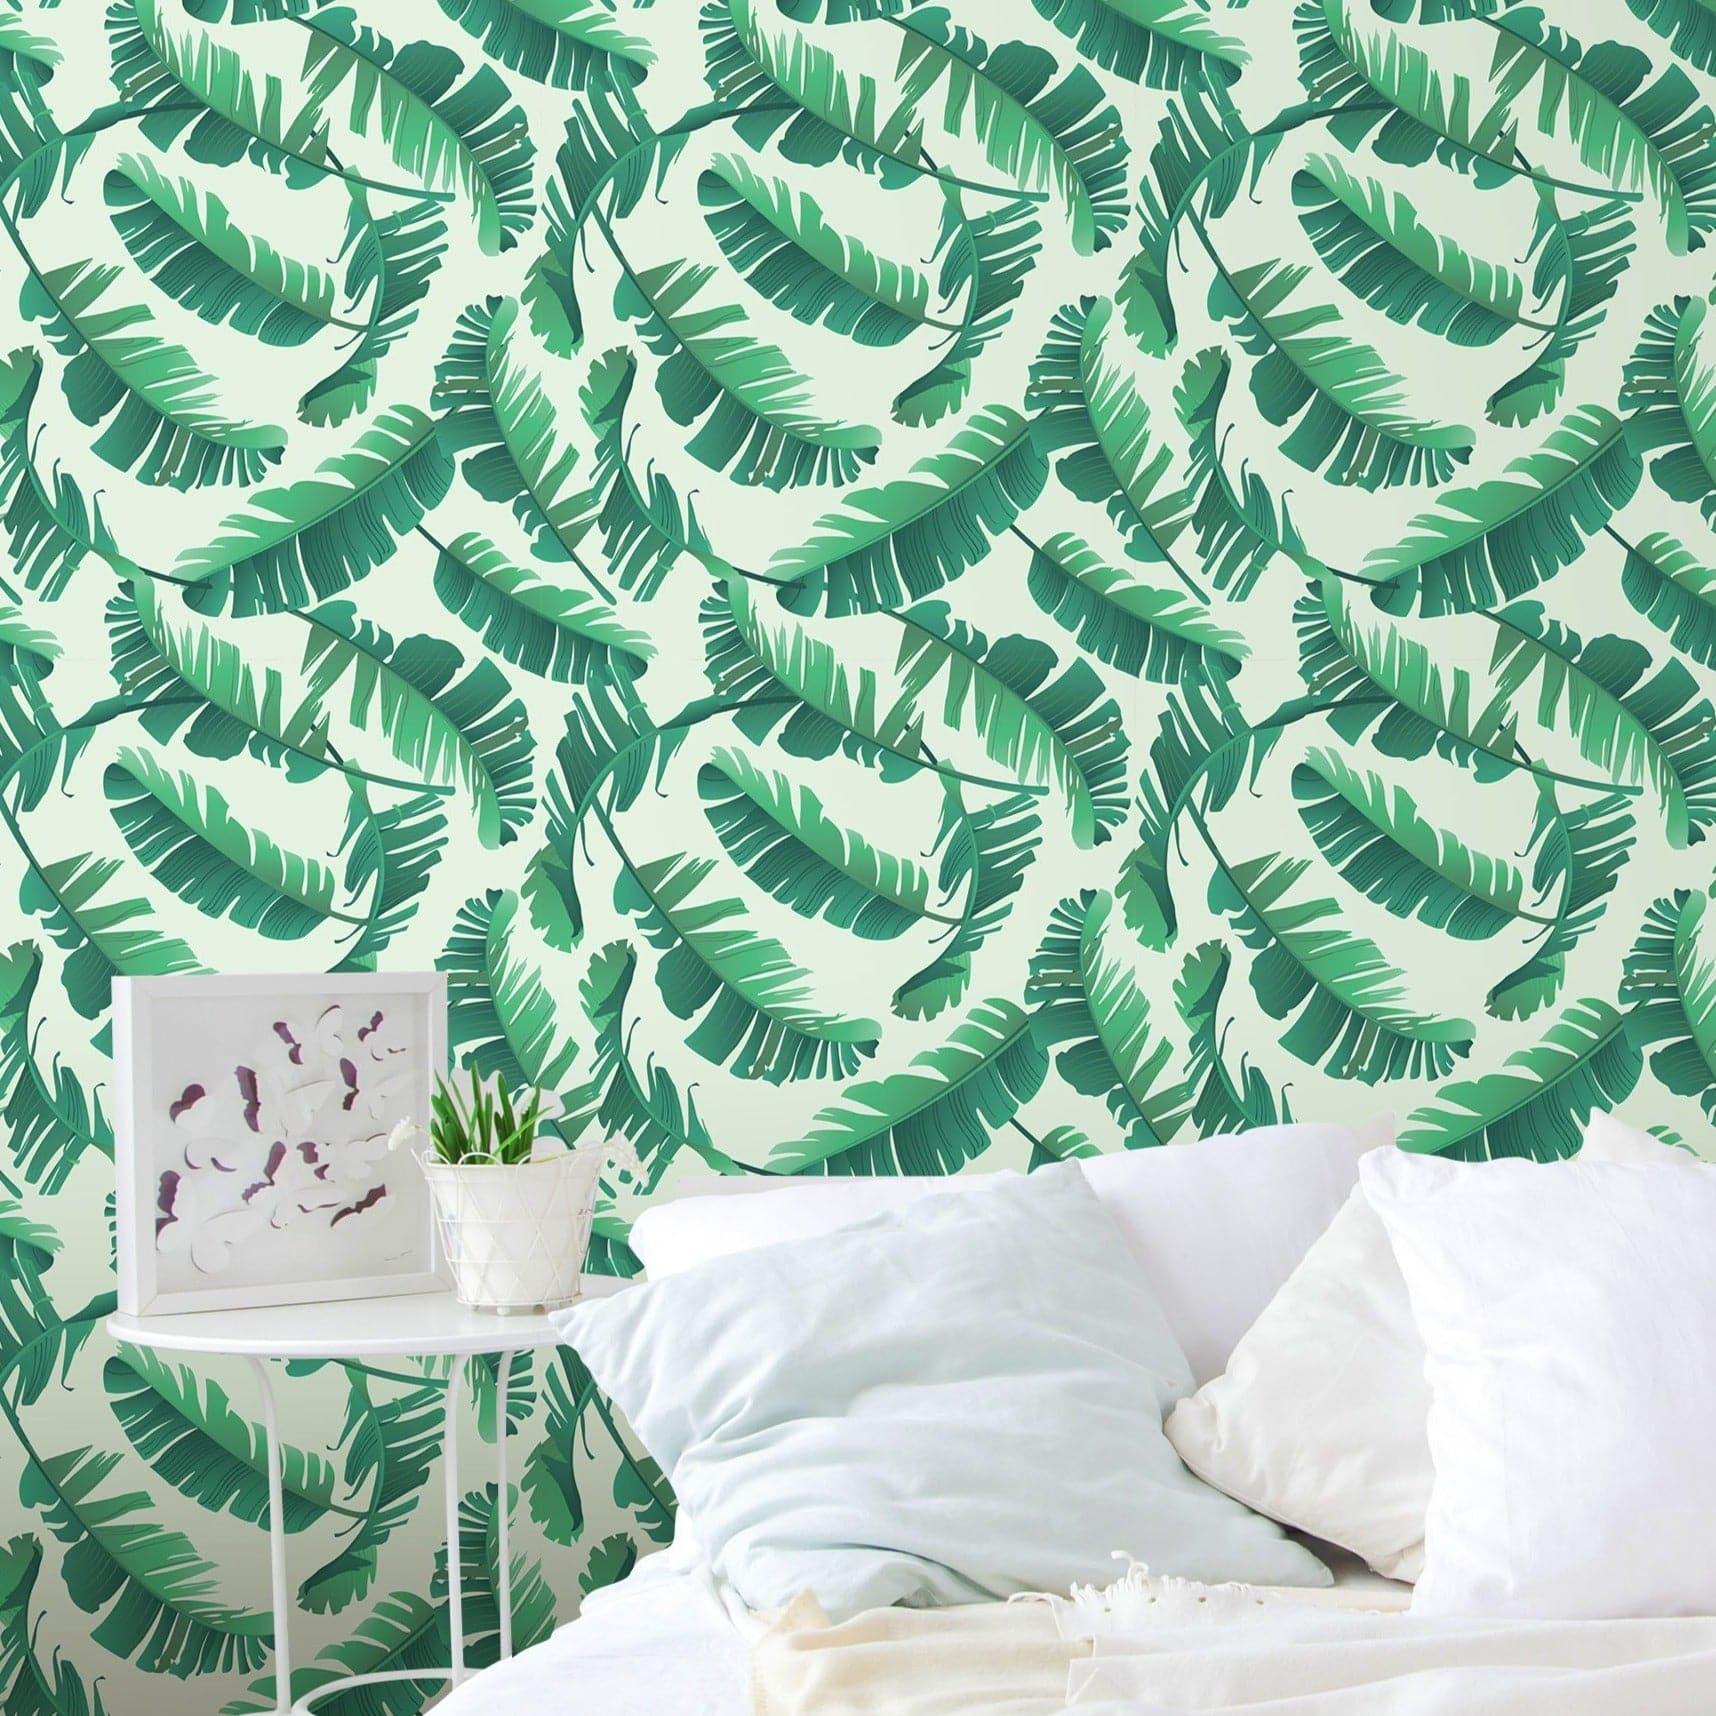 Tropical Monstera Leaves Purple Flowers Wallpaper Tropical Monstera Leaves Purple Flowers Wallpaper Illustrated Tropical Banana Palm Leaves Wallpaper 